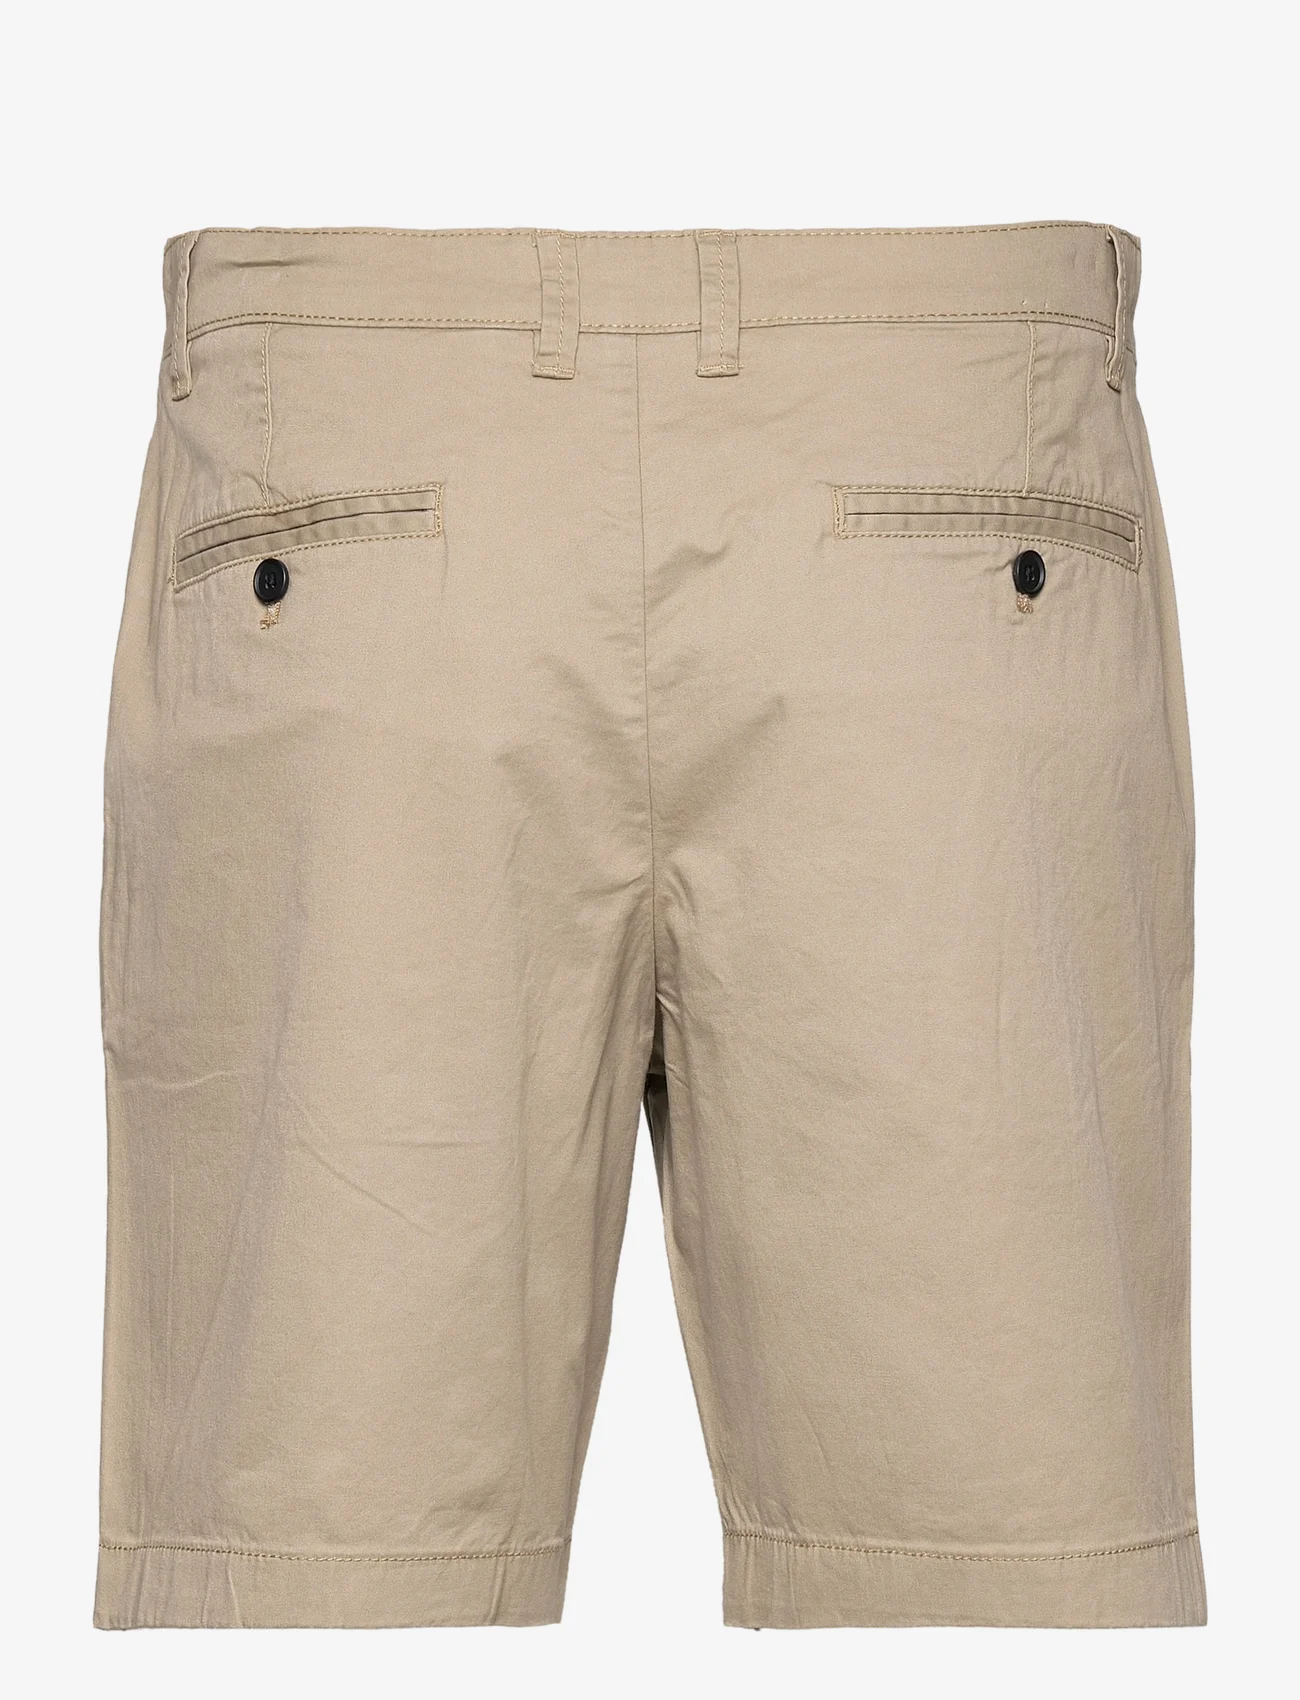 Selected Homme - SLHCOMFORT-HOMME FLEX SHORTS W NOOS - lowest prices - chinchilla - 1